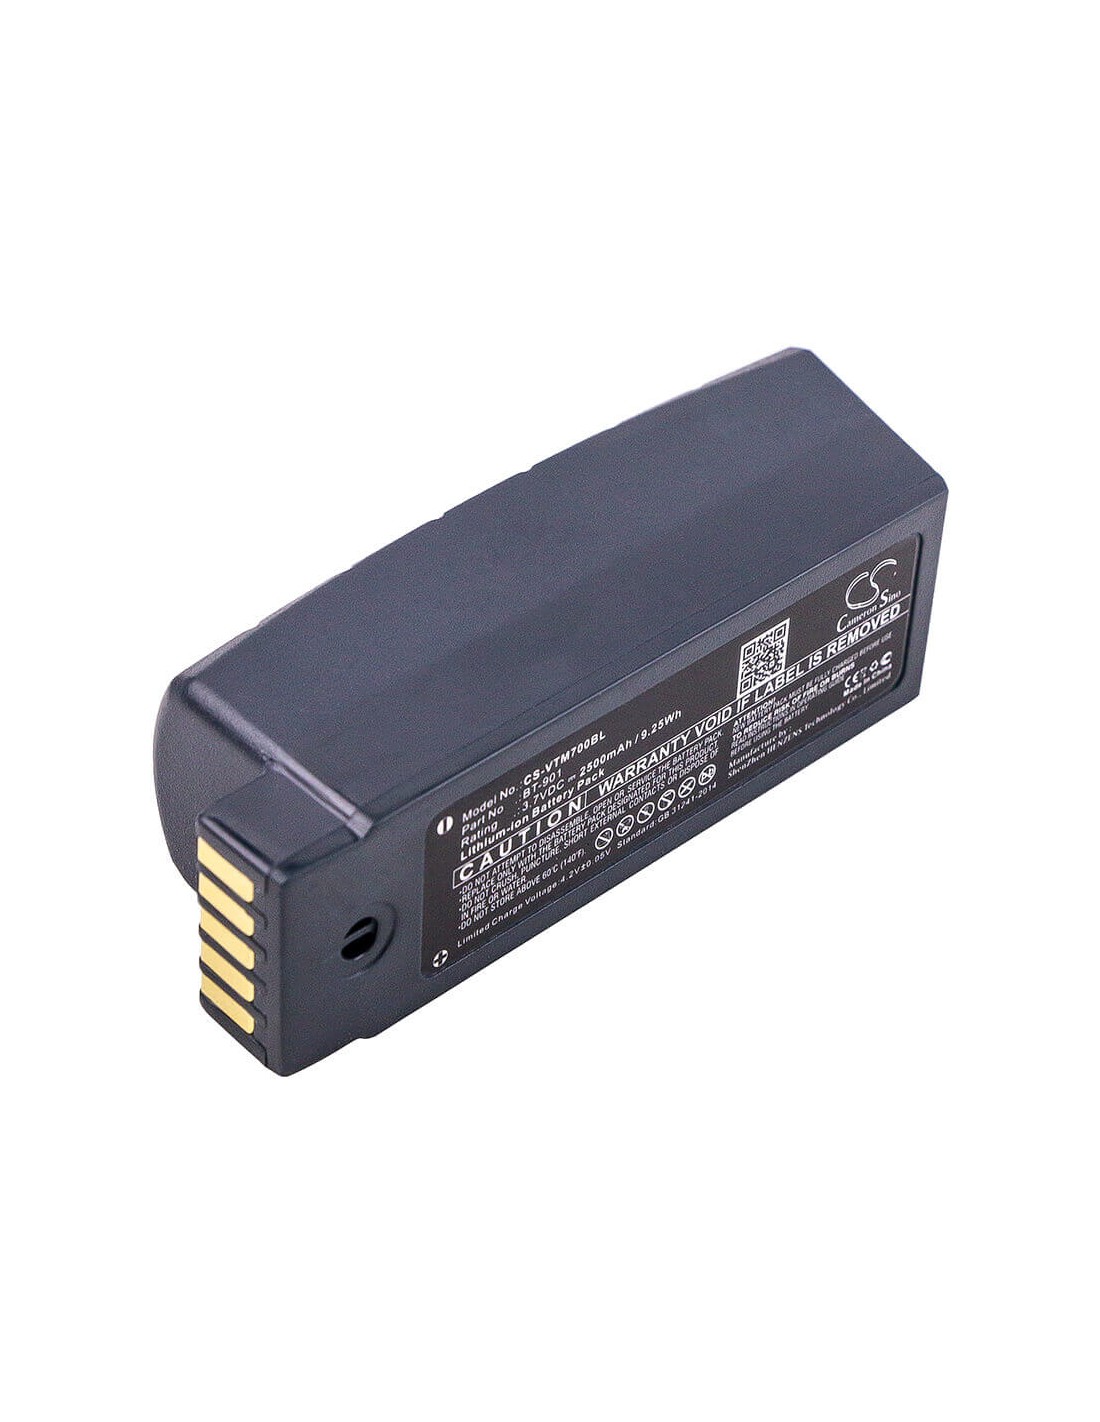 Battery for Vocollect, A700, A710, A720 3.7V, 2500mAh - 9.25Wh